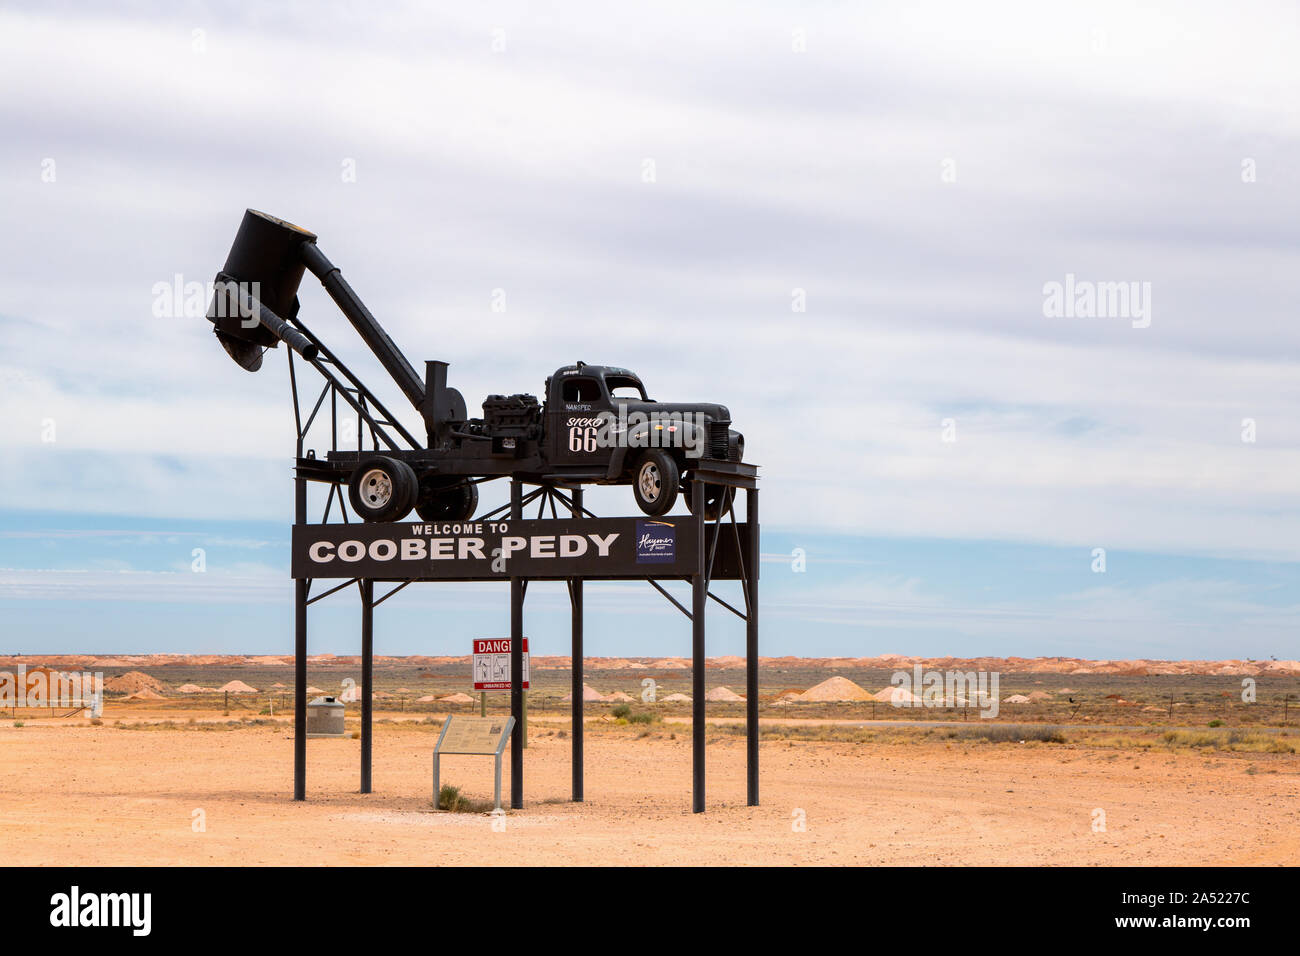 Welcome to Coober Pedy, Mininig truck on stilts as sight along the Stuart Highway in Coober Pedy, South Australia, Australia, Stock Photo